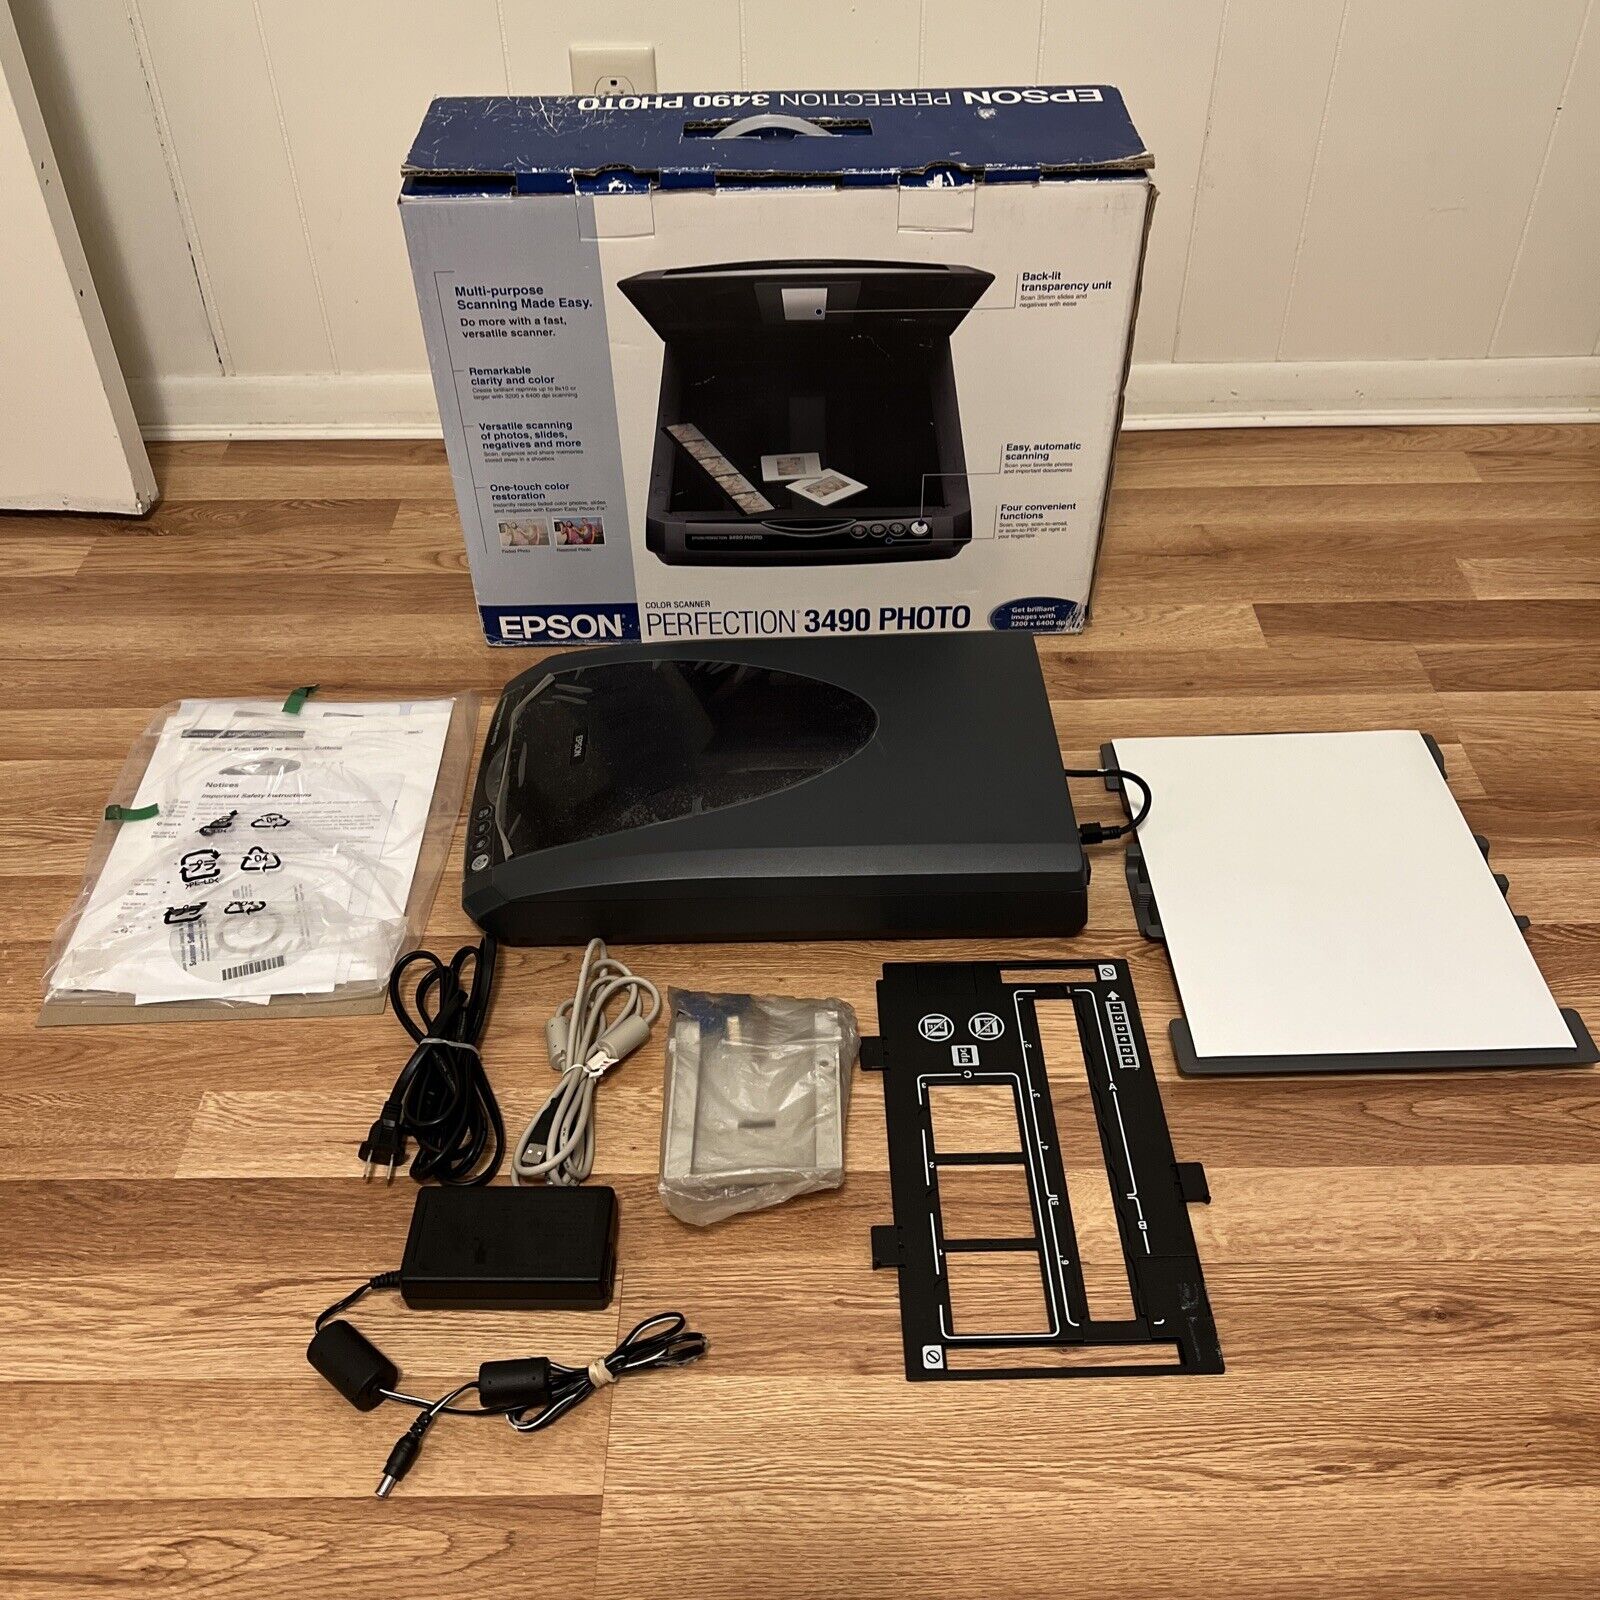 Epson Perfection 3490 Flatbed USB 2.0 Photo Scanner - Complete In Original Box